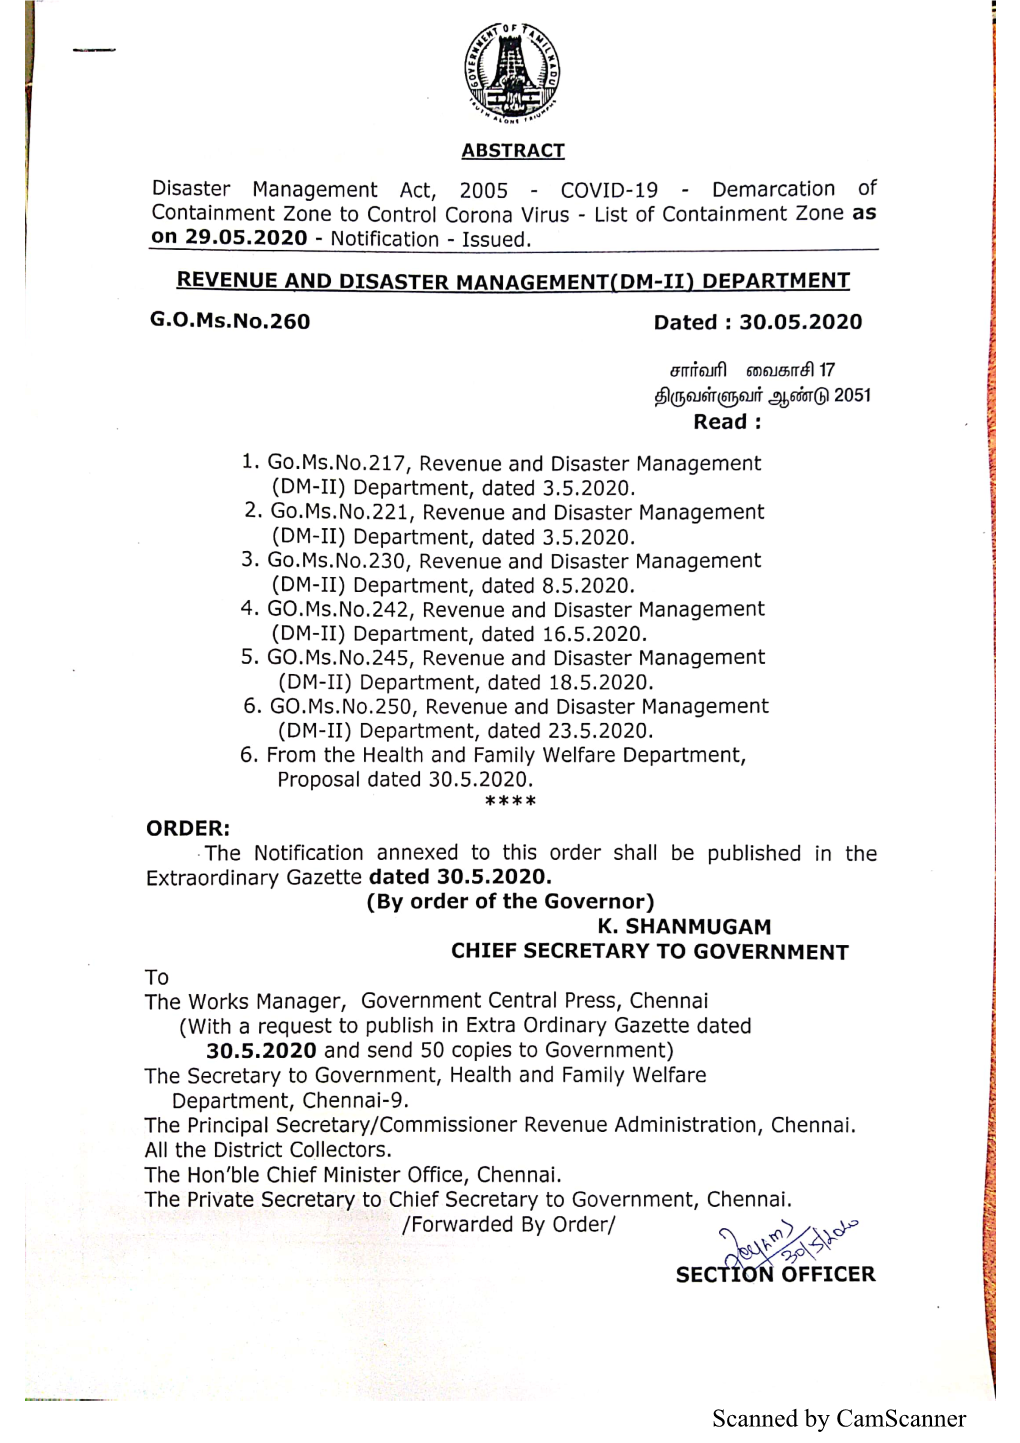 Tamil Nadu-30.5.20-List of Containment Zones As on 29.5.2020